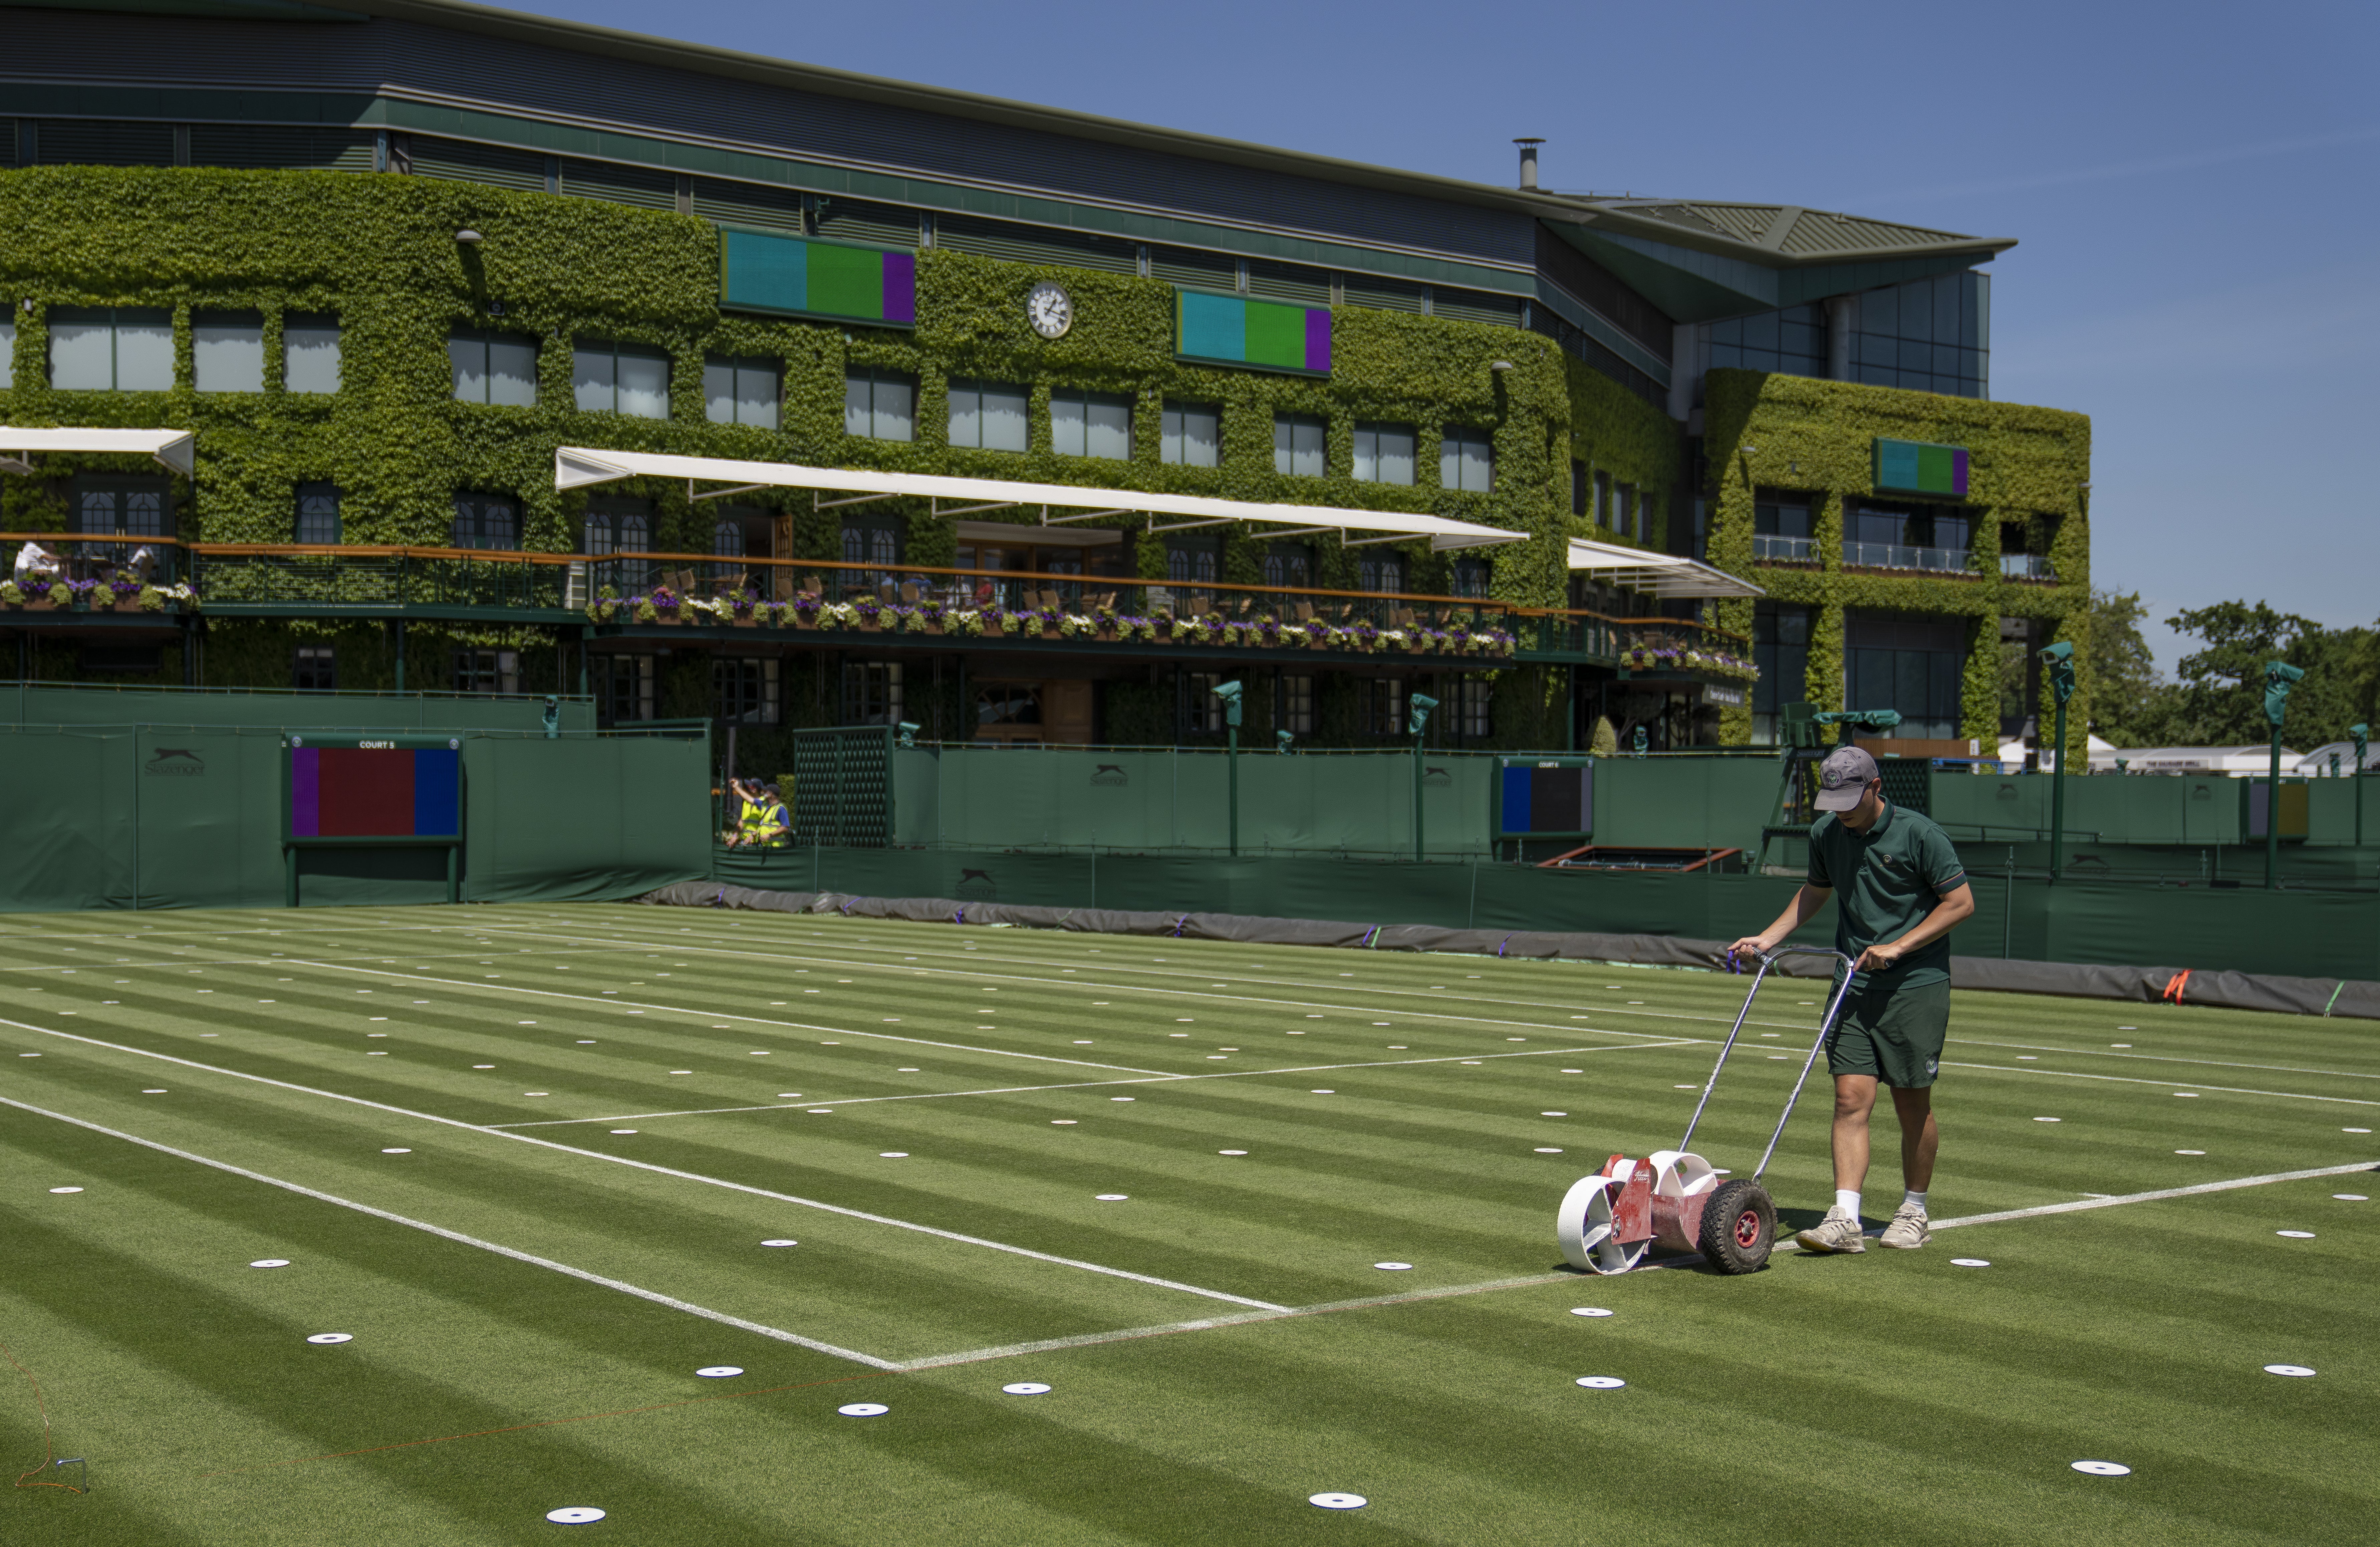 Lines are painted on the outside courts at Wimbledon